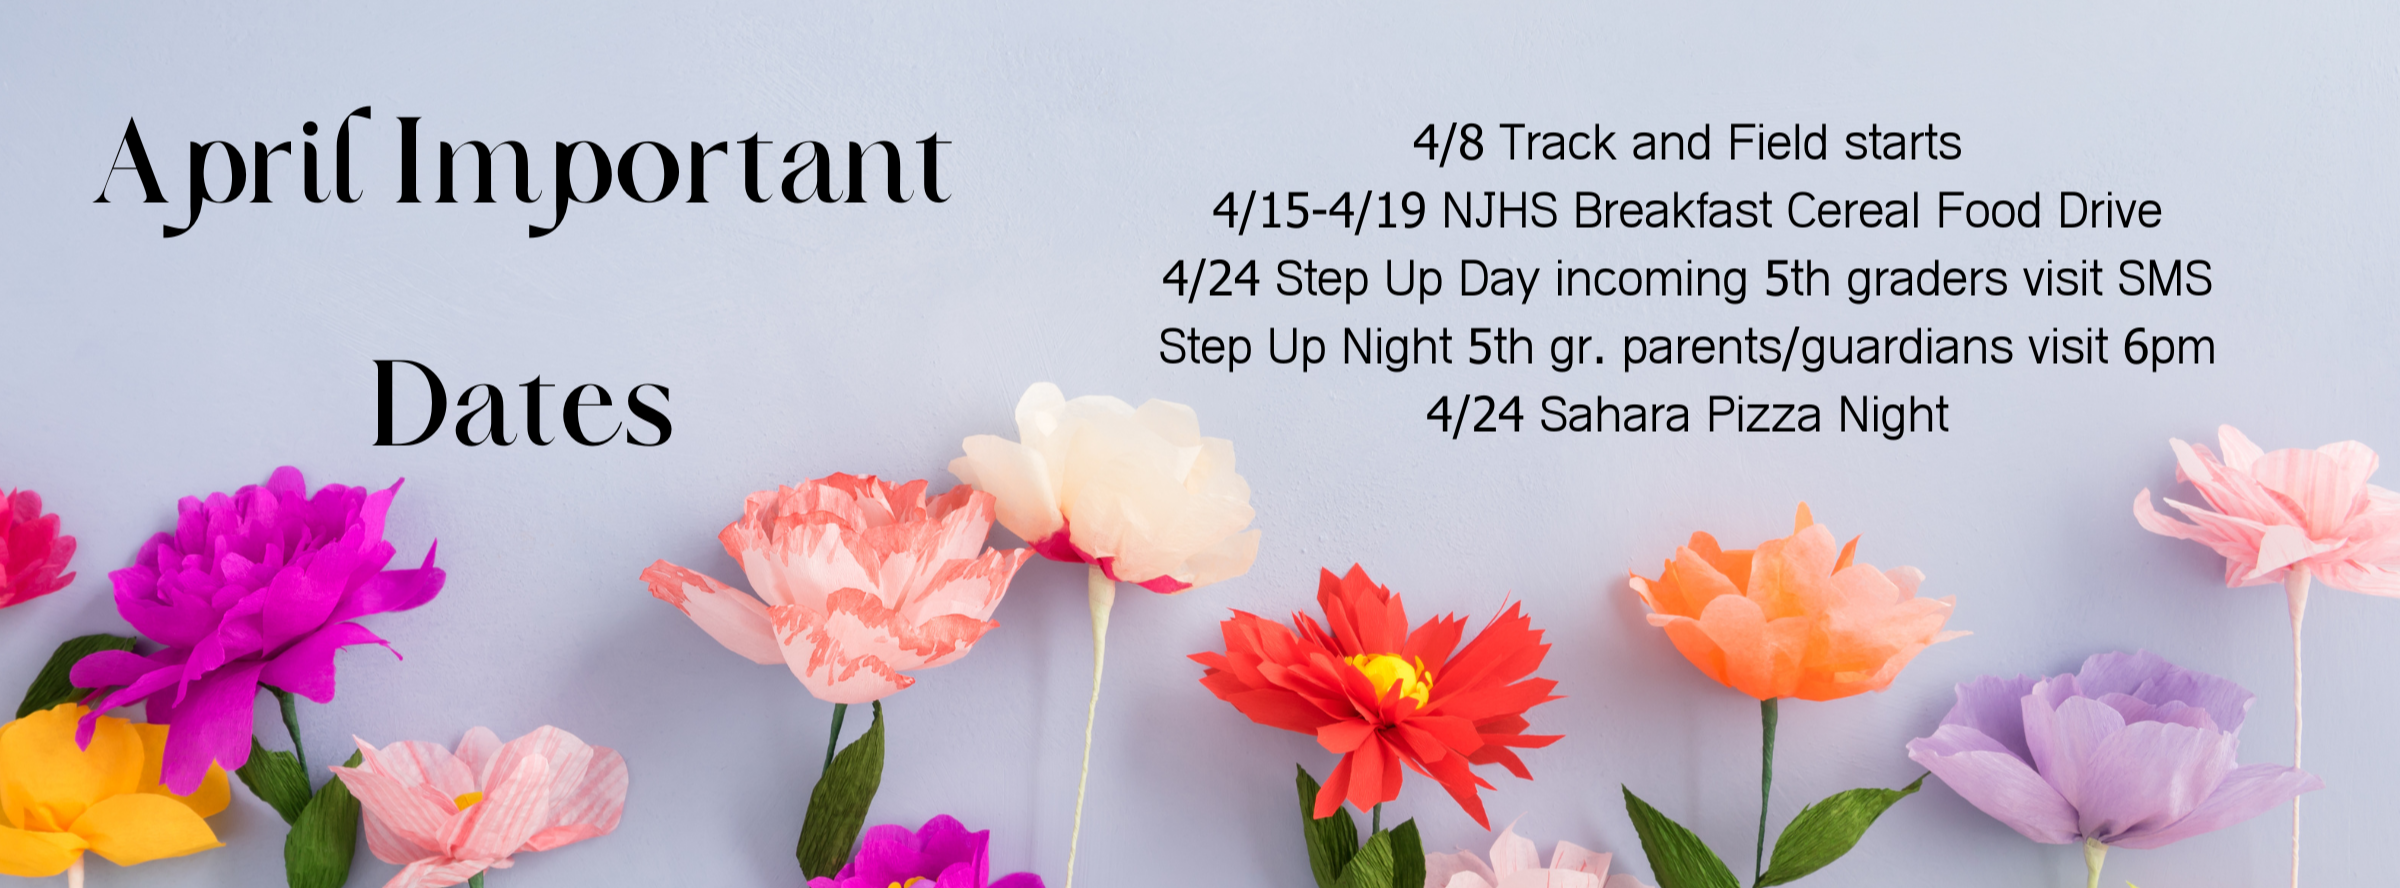 4/8 Track and Field starts 4/15-4/19 NJHS Breakfast Cereal Food Drive 4/24 Step Up Day incoming 5th graders visit SMS Step Up Night 5th gr. parents/guardians visit 6pm 4/24 Sahara Pizza Night